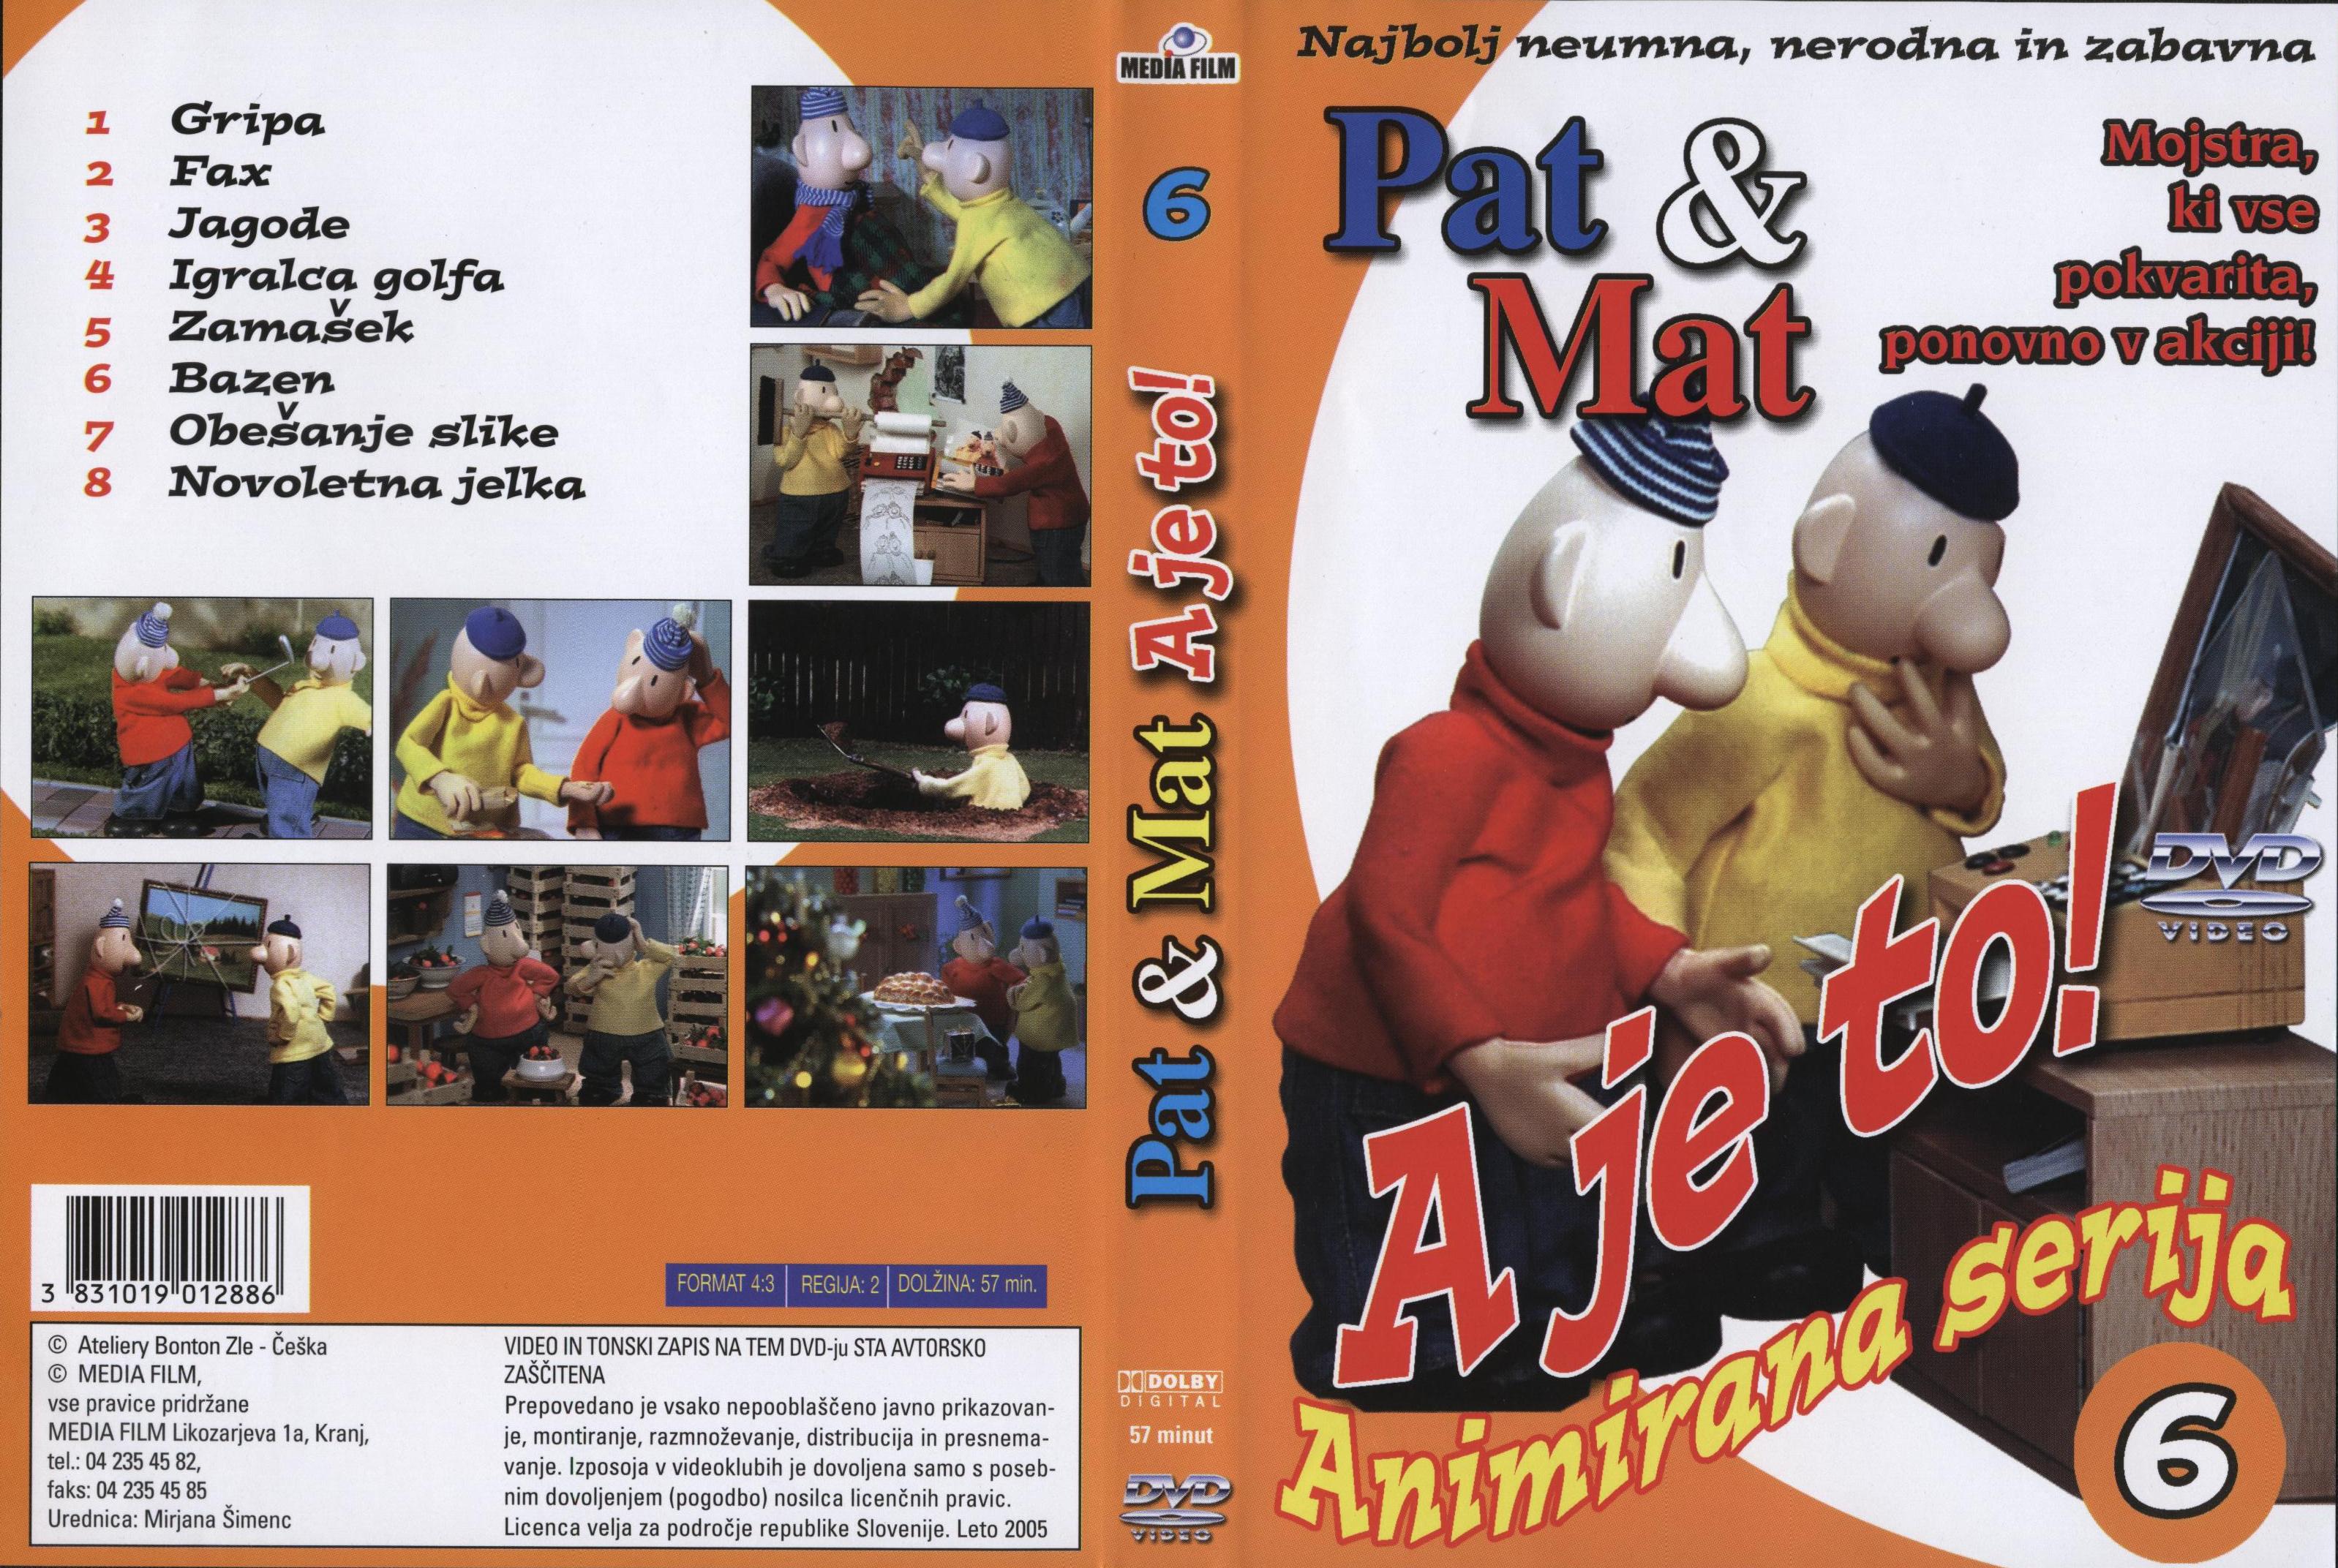 Click to view full size image -  DVD Cover - A - DVD - A JE TO 6 SLO.jpg - DVD - A JE TO 6 SLO.jpg